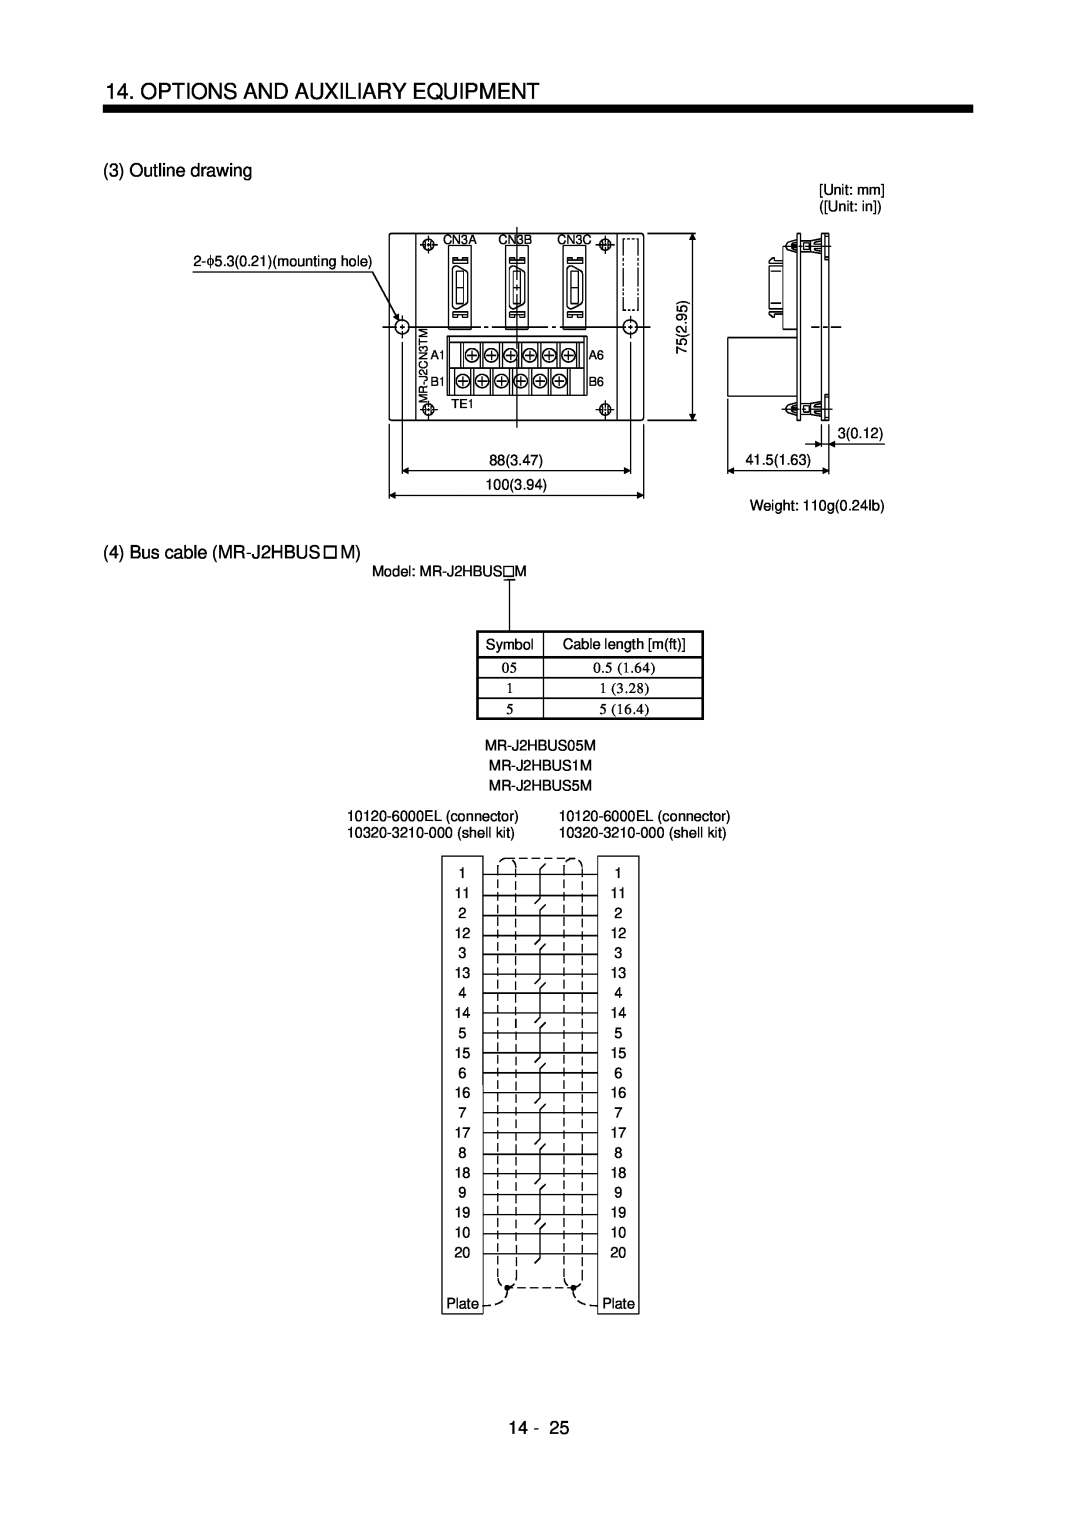 Mitsubishi Electronics MR-J2S- CL specifications Bus cable MR-J2HBUS, Options And Auxiliary Equipment, Outline drawing, 14 